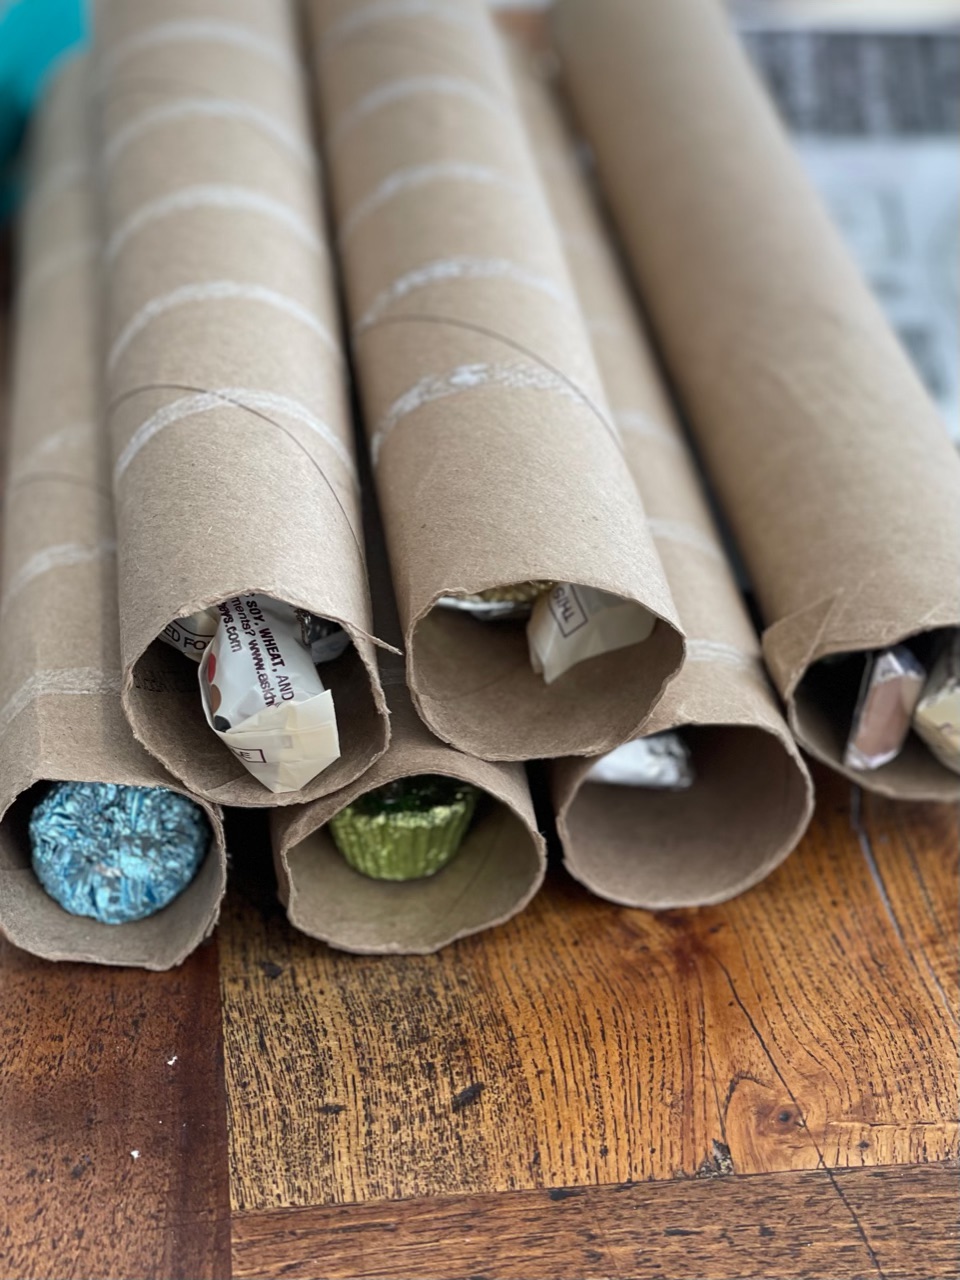 craft from paper towel rolls // ways to reuse/recycle empty tissue roll 